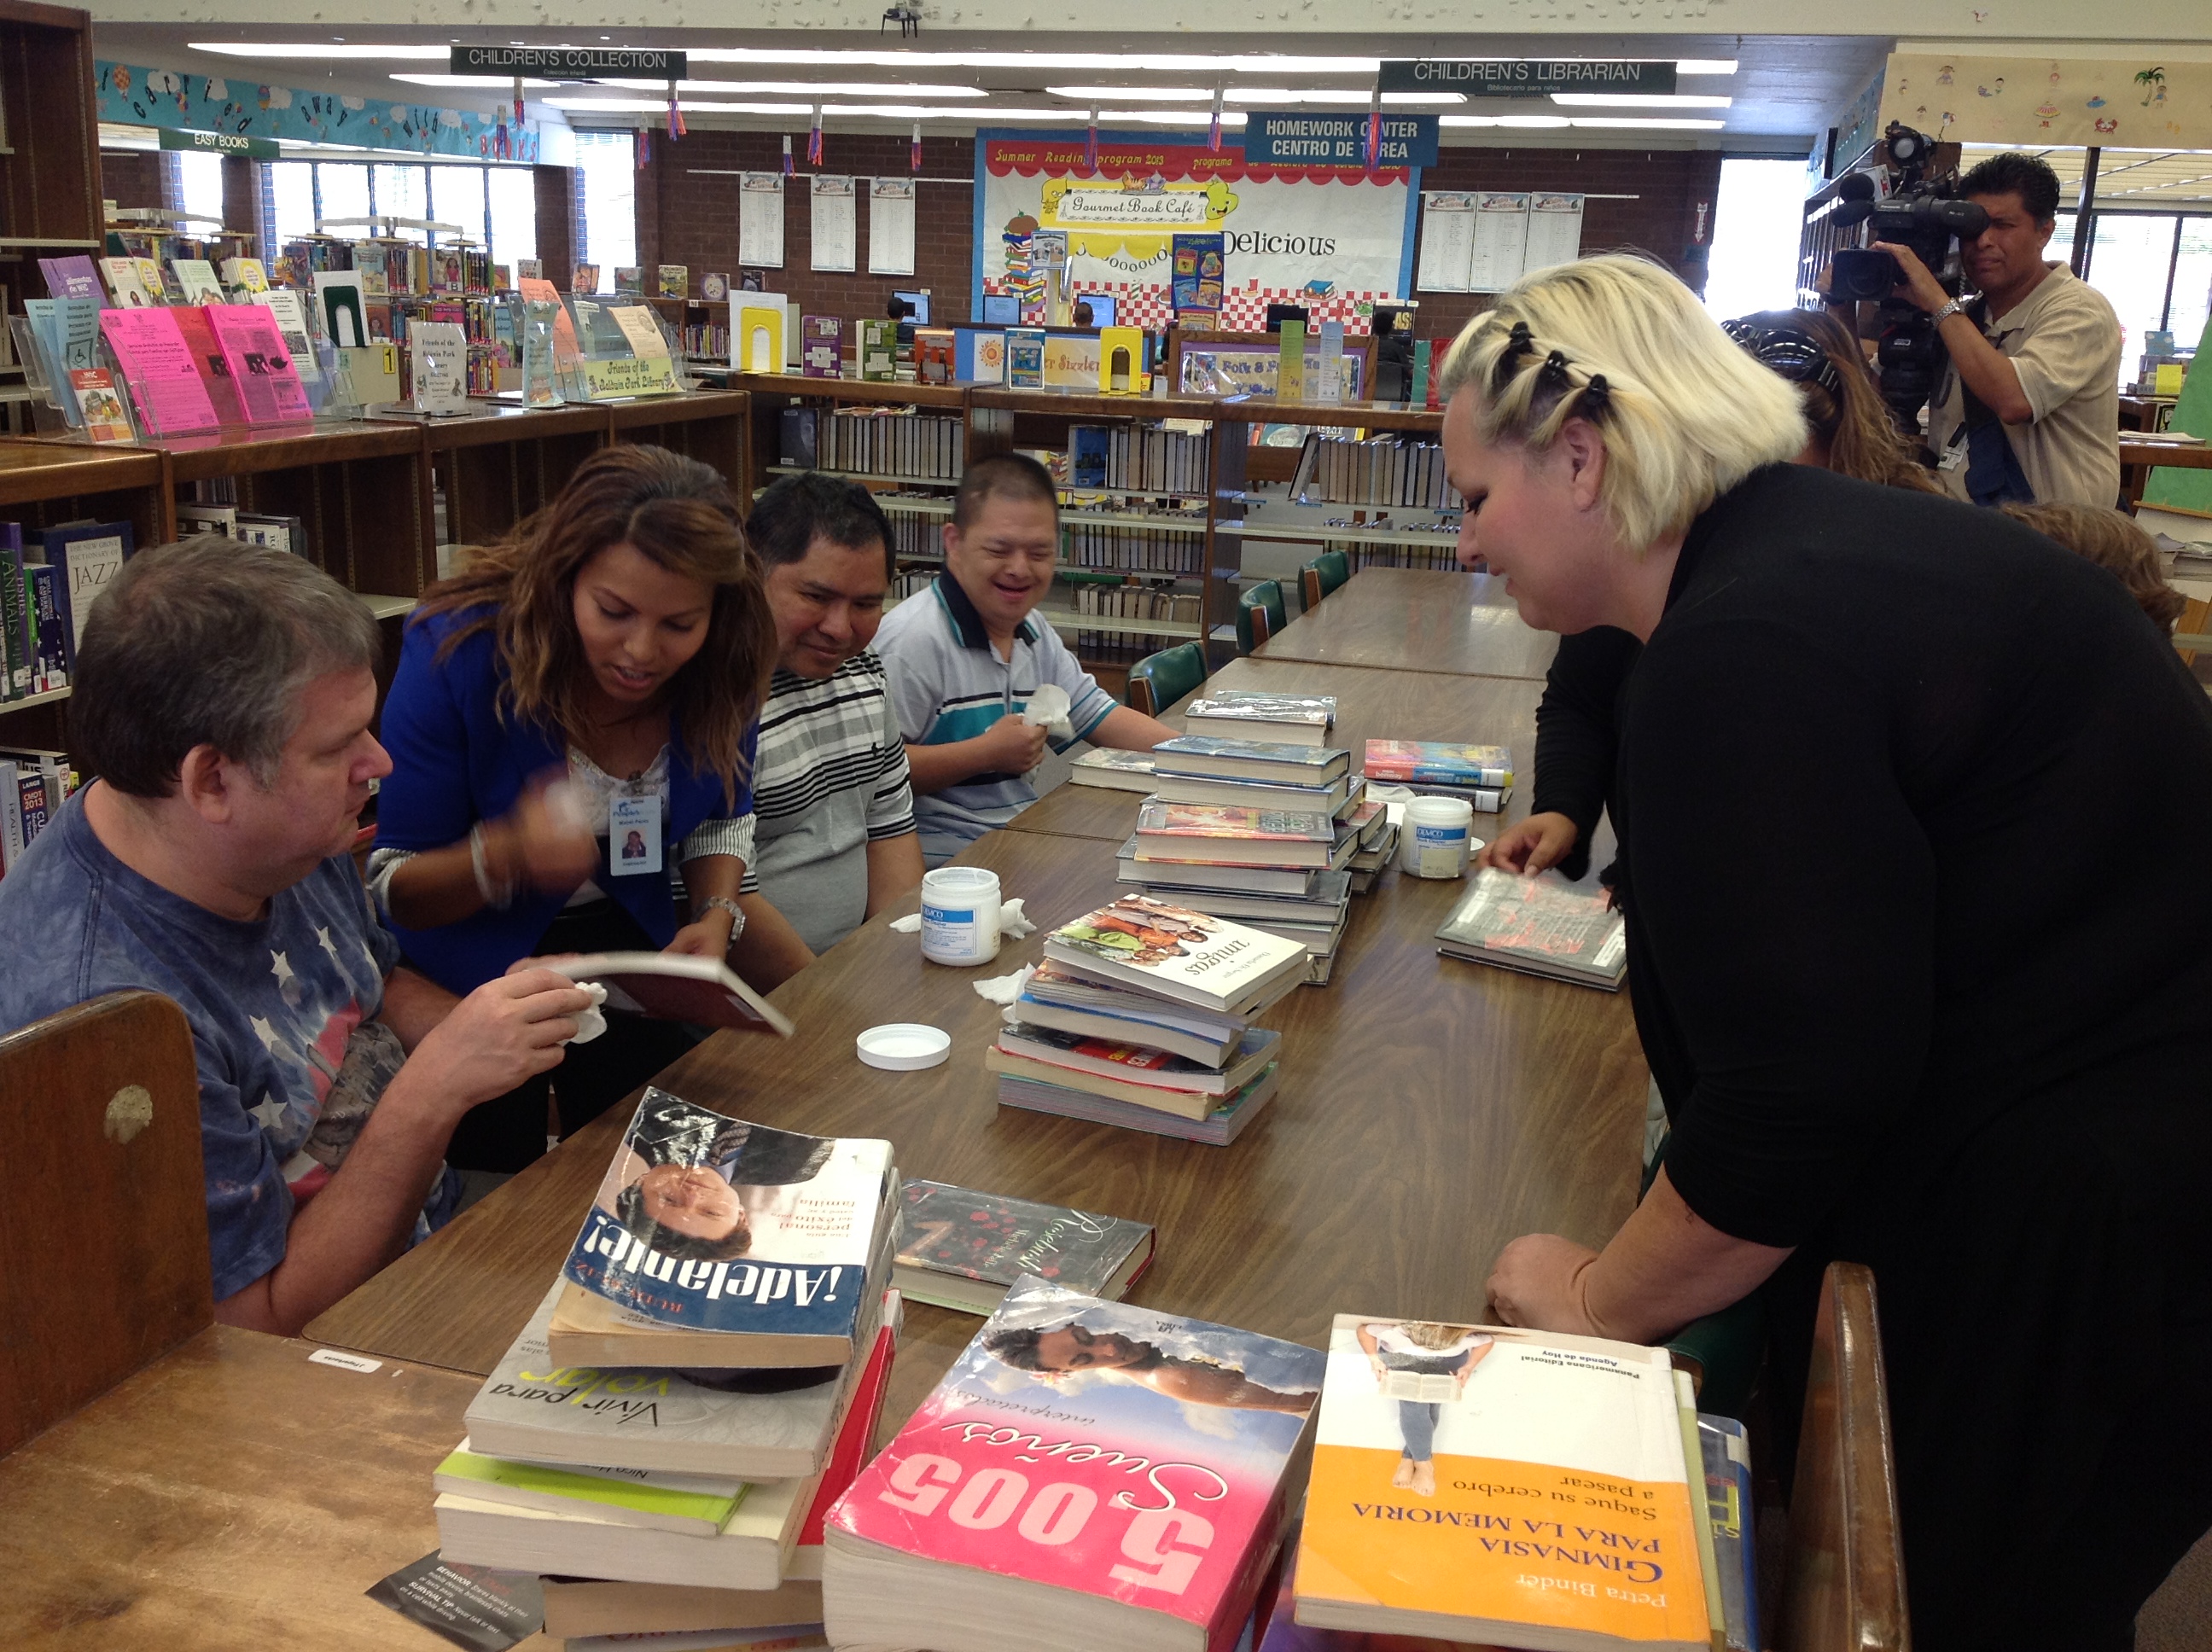 People's Care clients volunteered at the local library (photo by GSC)